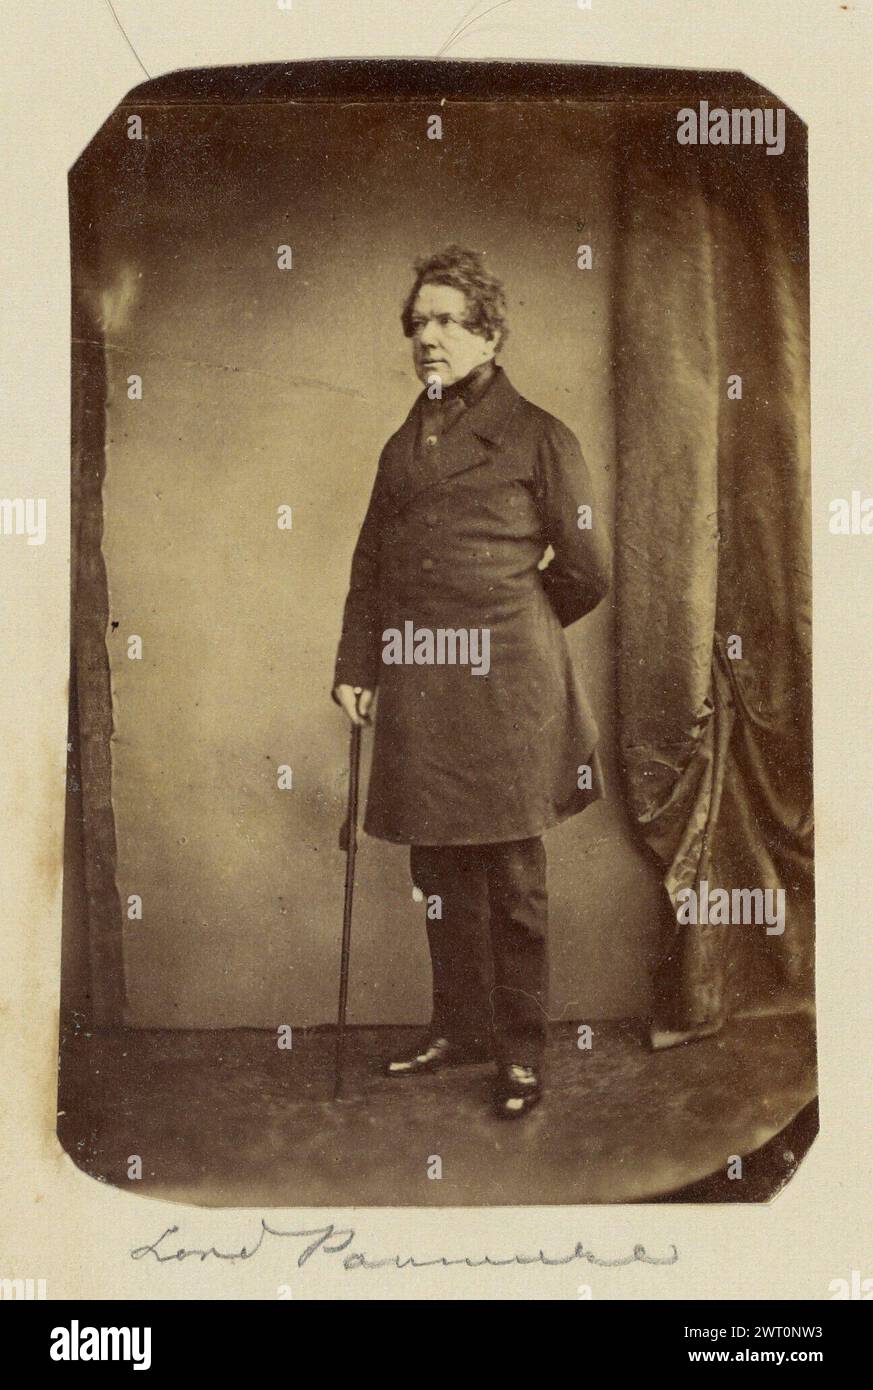 Lord Panmure. Unknown, photographer about 1852–1860 A portrait of Fox Maule-Ramsay, 11th Earl of Dalhousie, previously styled as the Lord Panmure. He is standing with one arm behind his back and one hand on a cane. (Recto, mount) lower center, below image, pencil: 'Lord Panmure'; Stock Photo